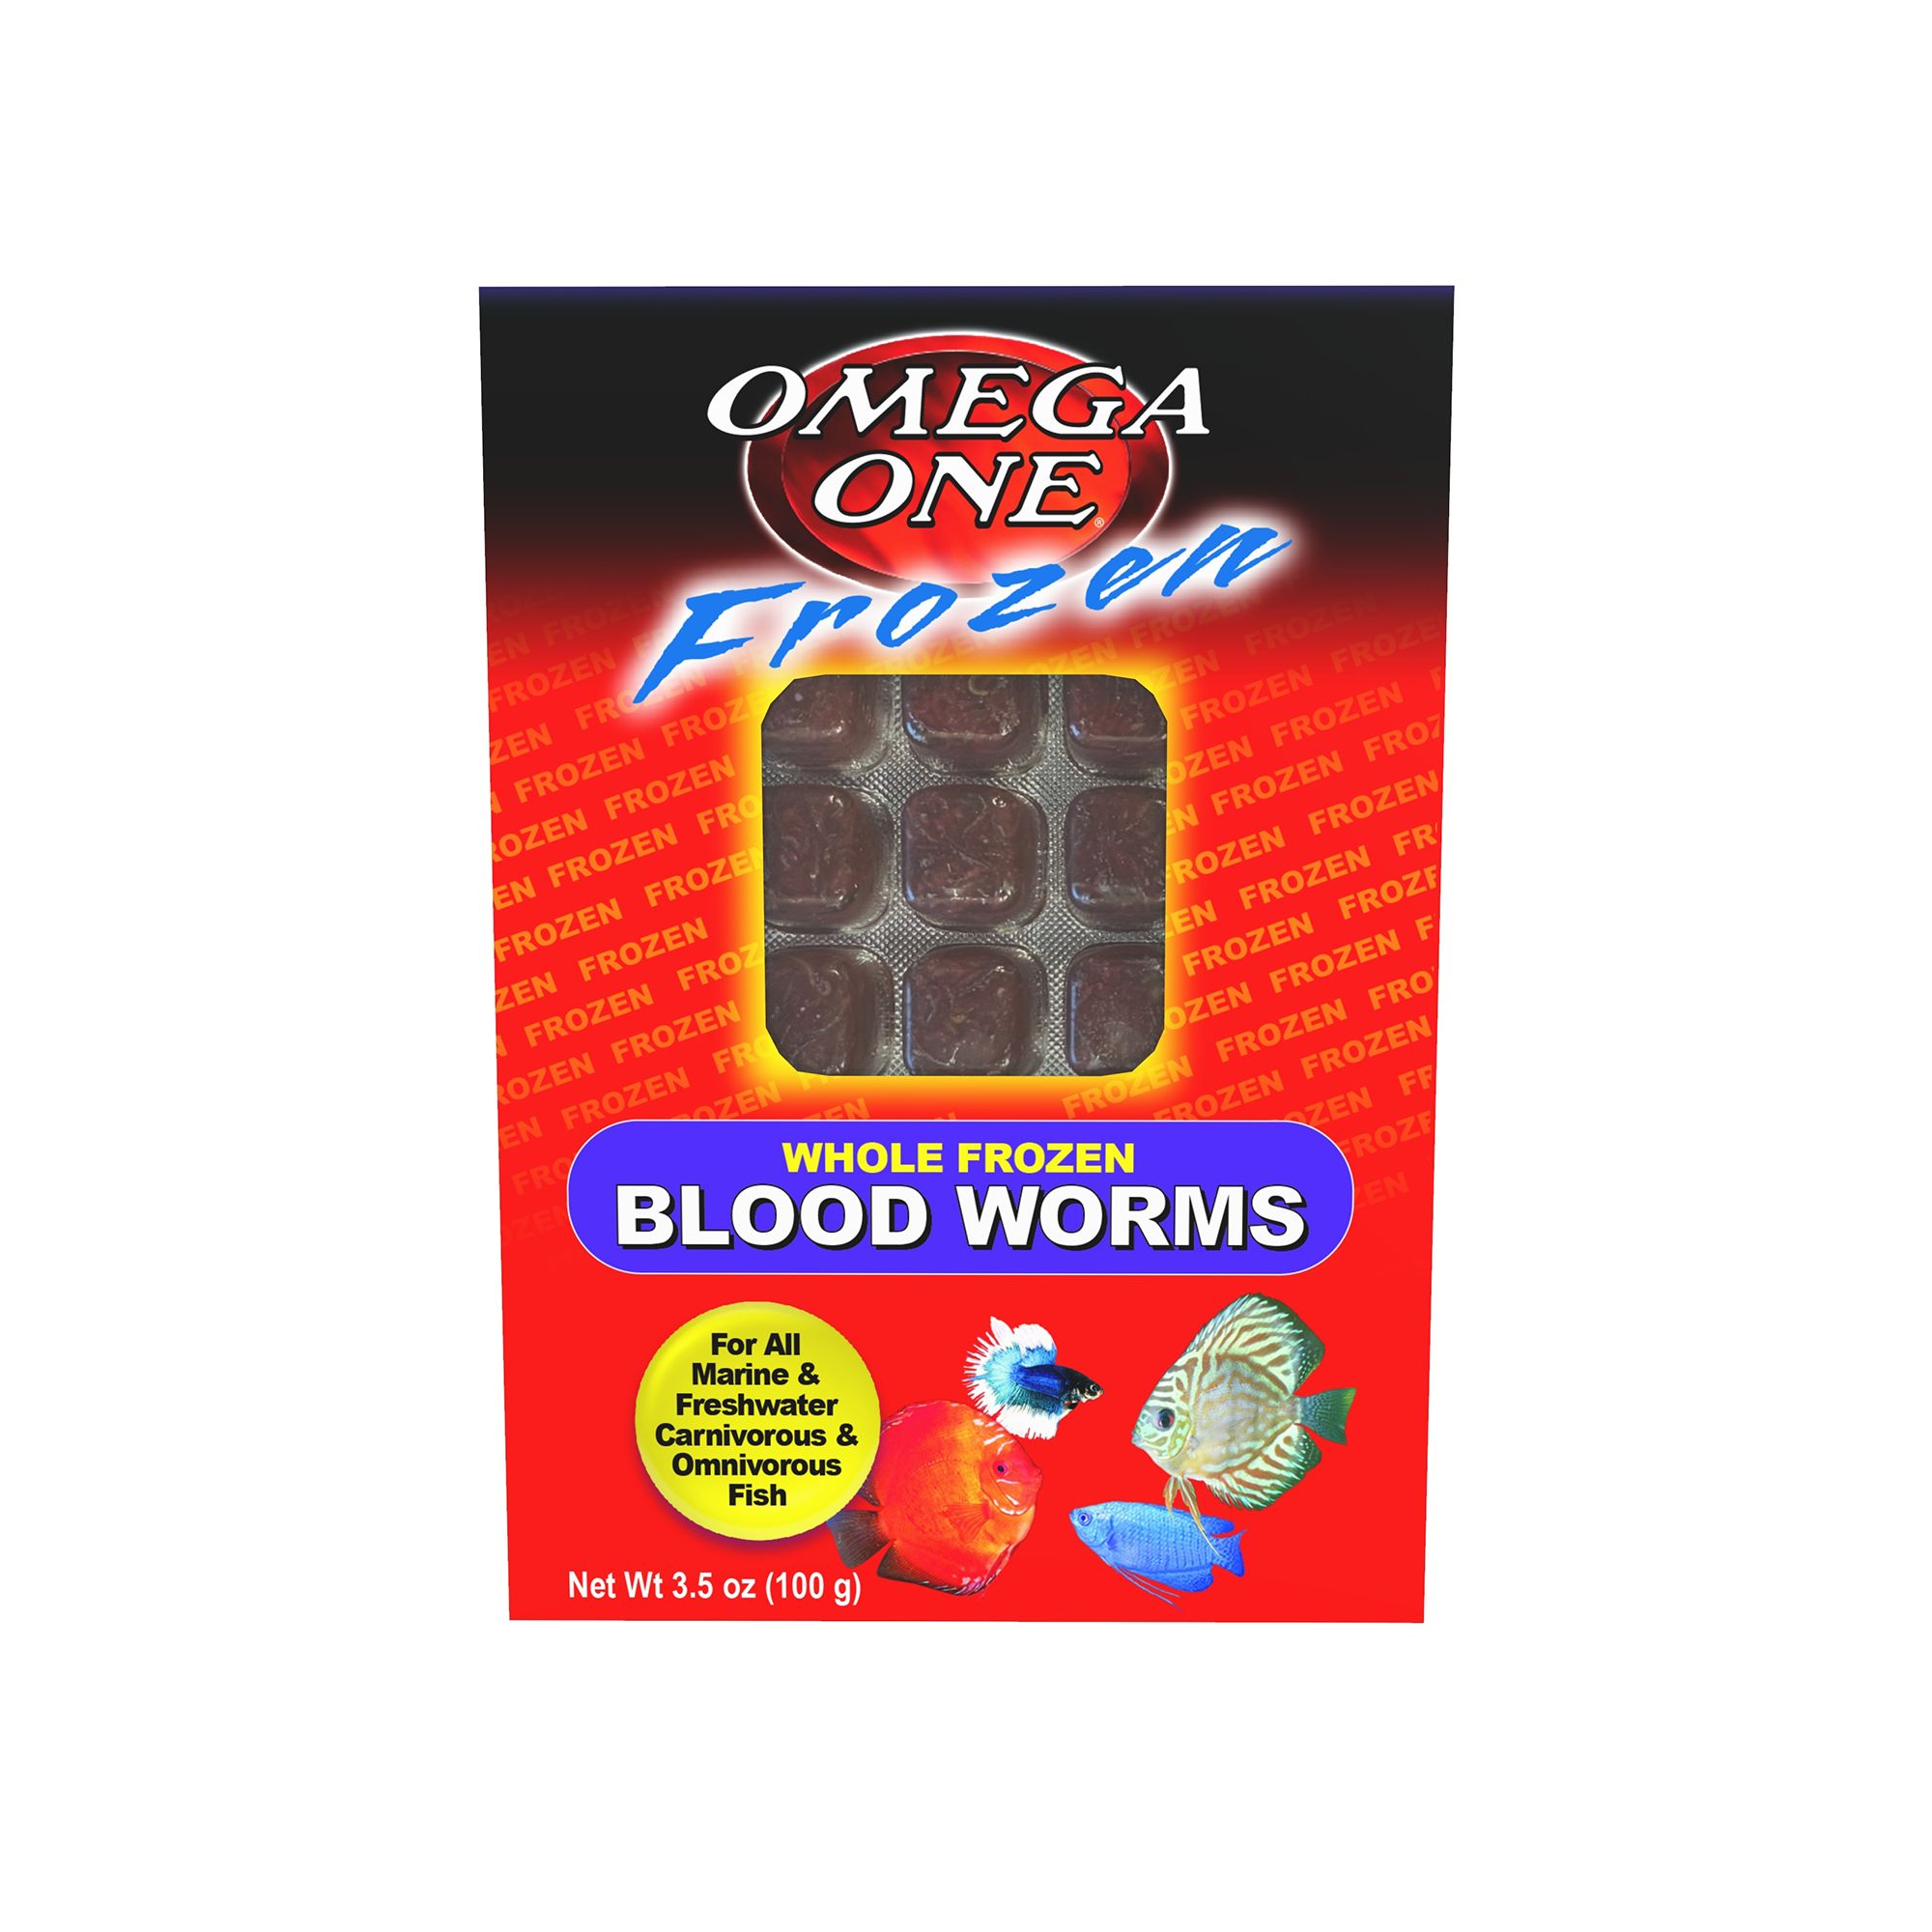 One Frozen Bloodworms | fish Food 